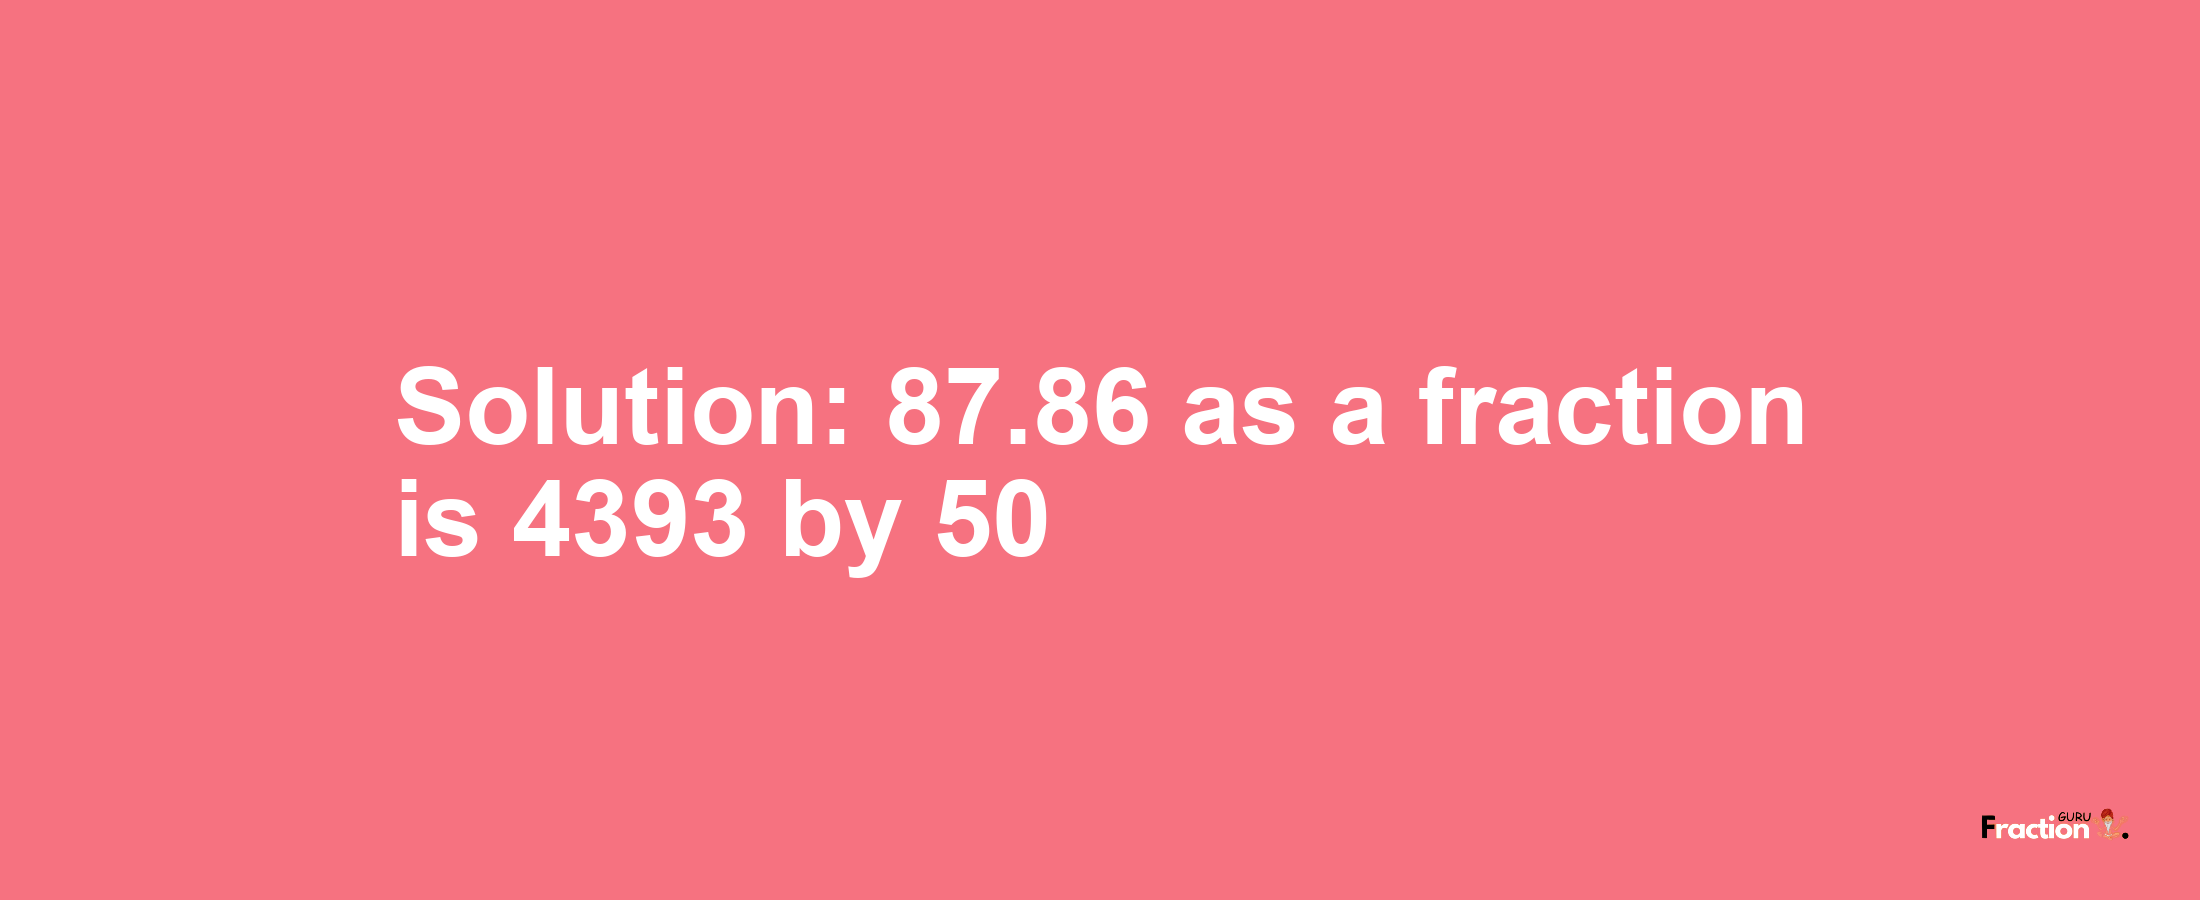 Solution:87.86 as a fraction is 4393/50